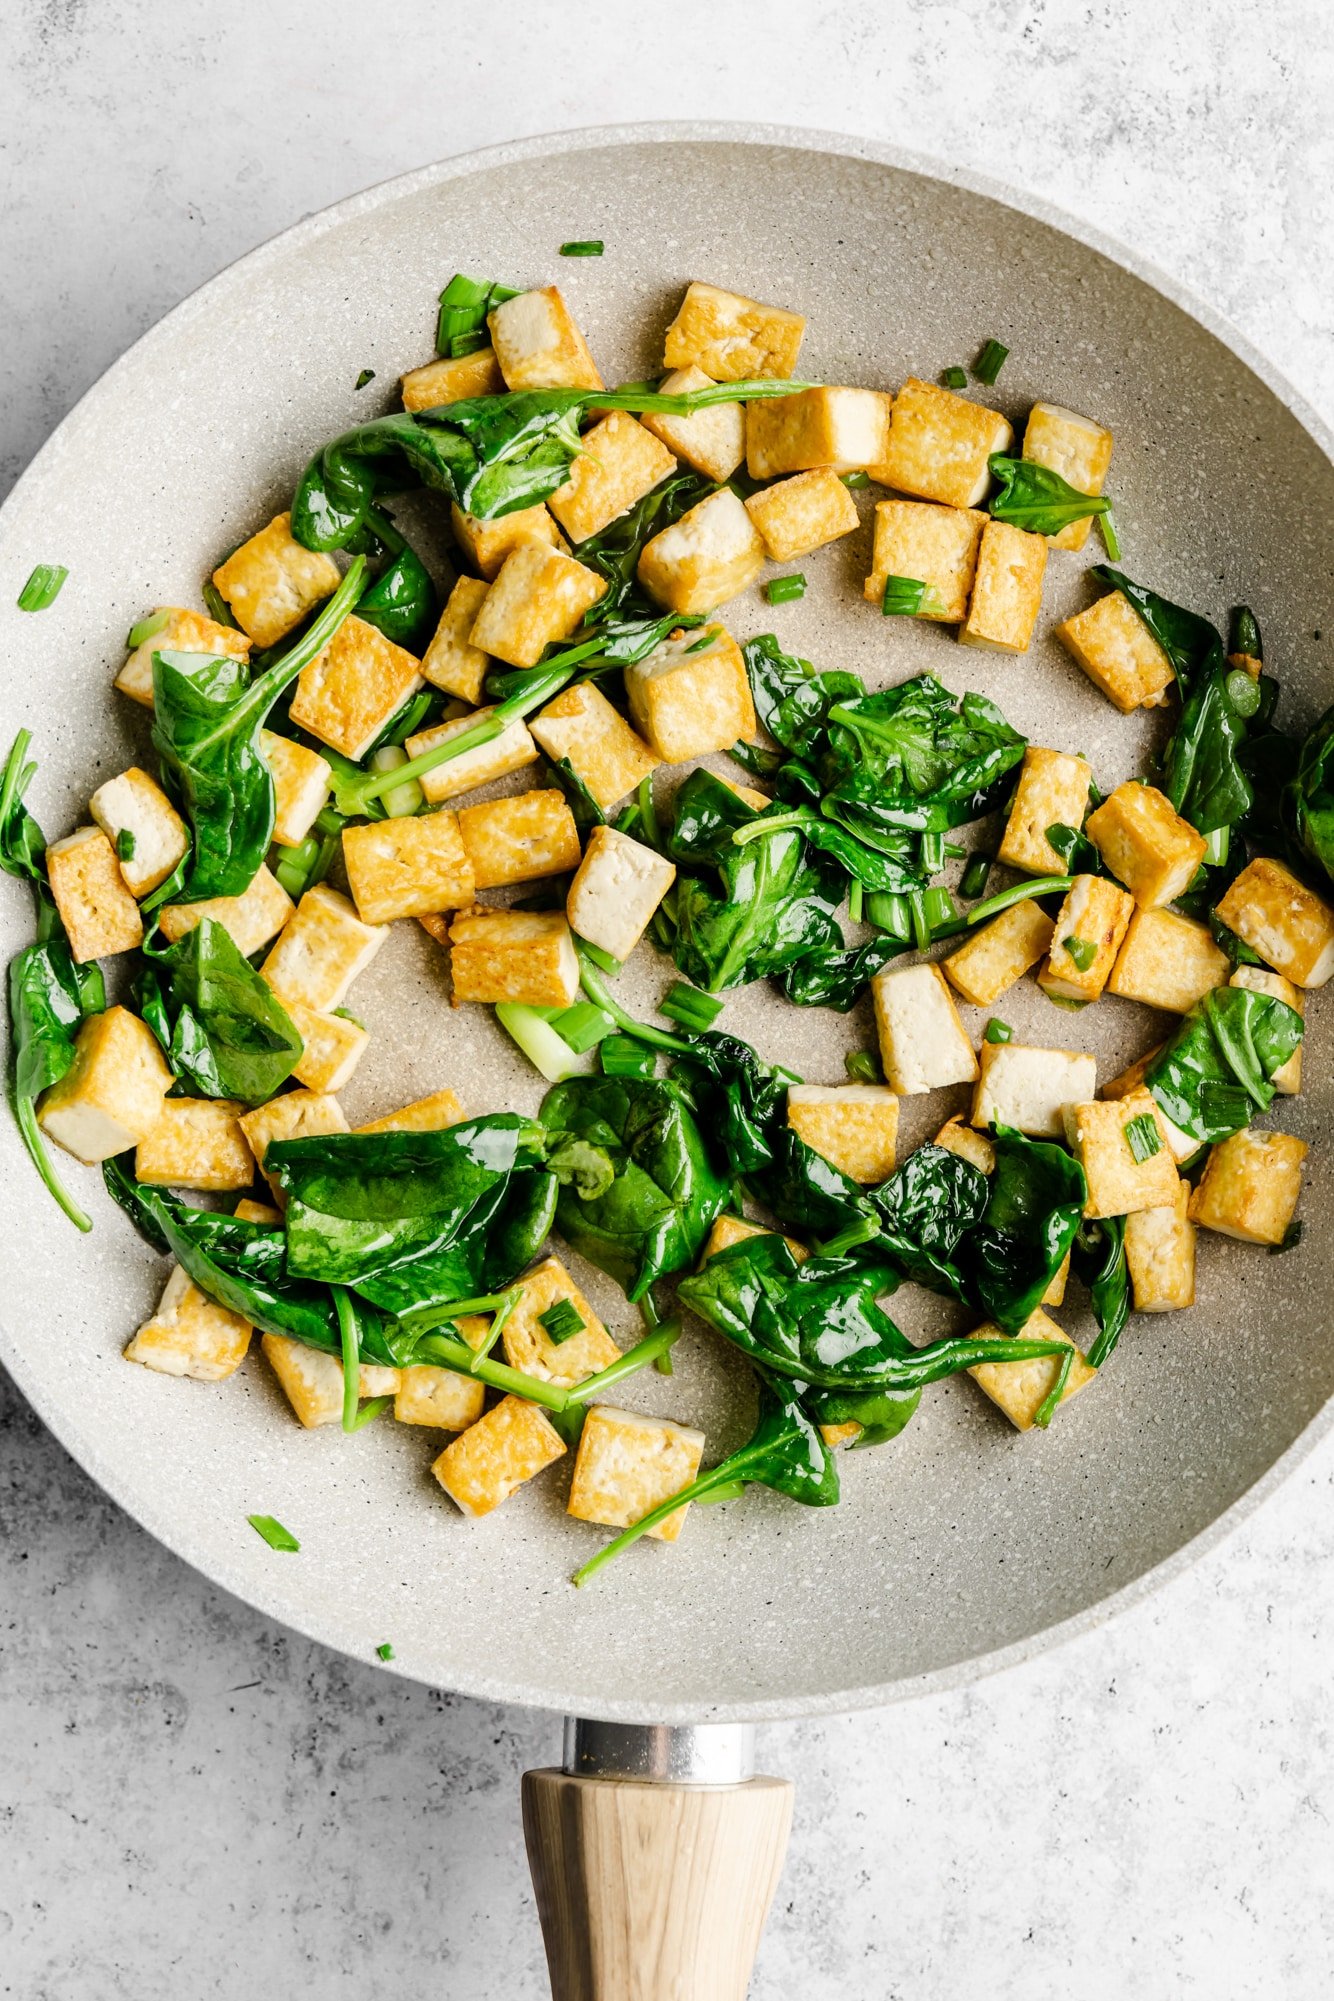 Tofu cubes and spinach stir-fried in a gray skillet.